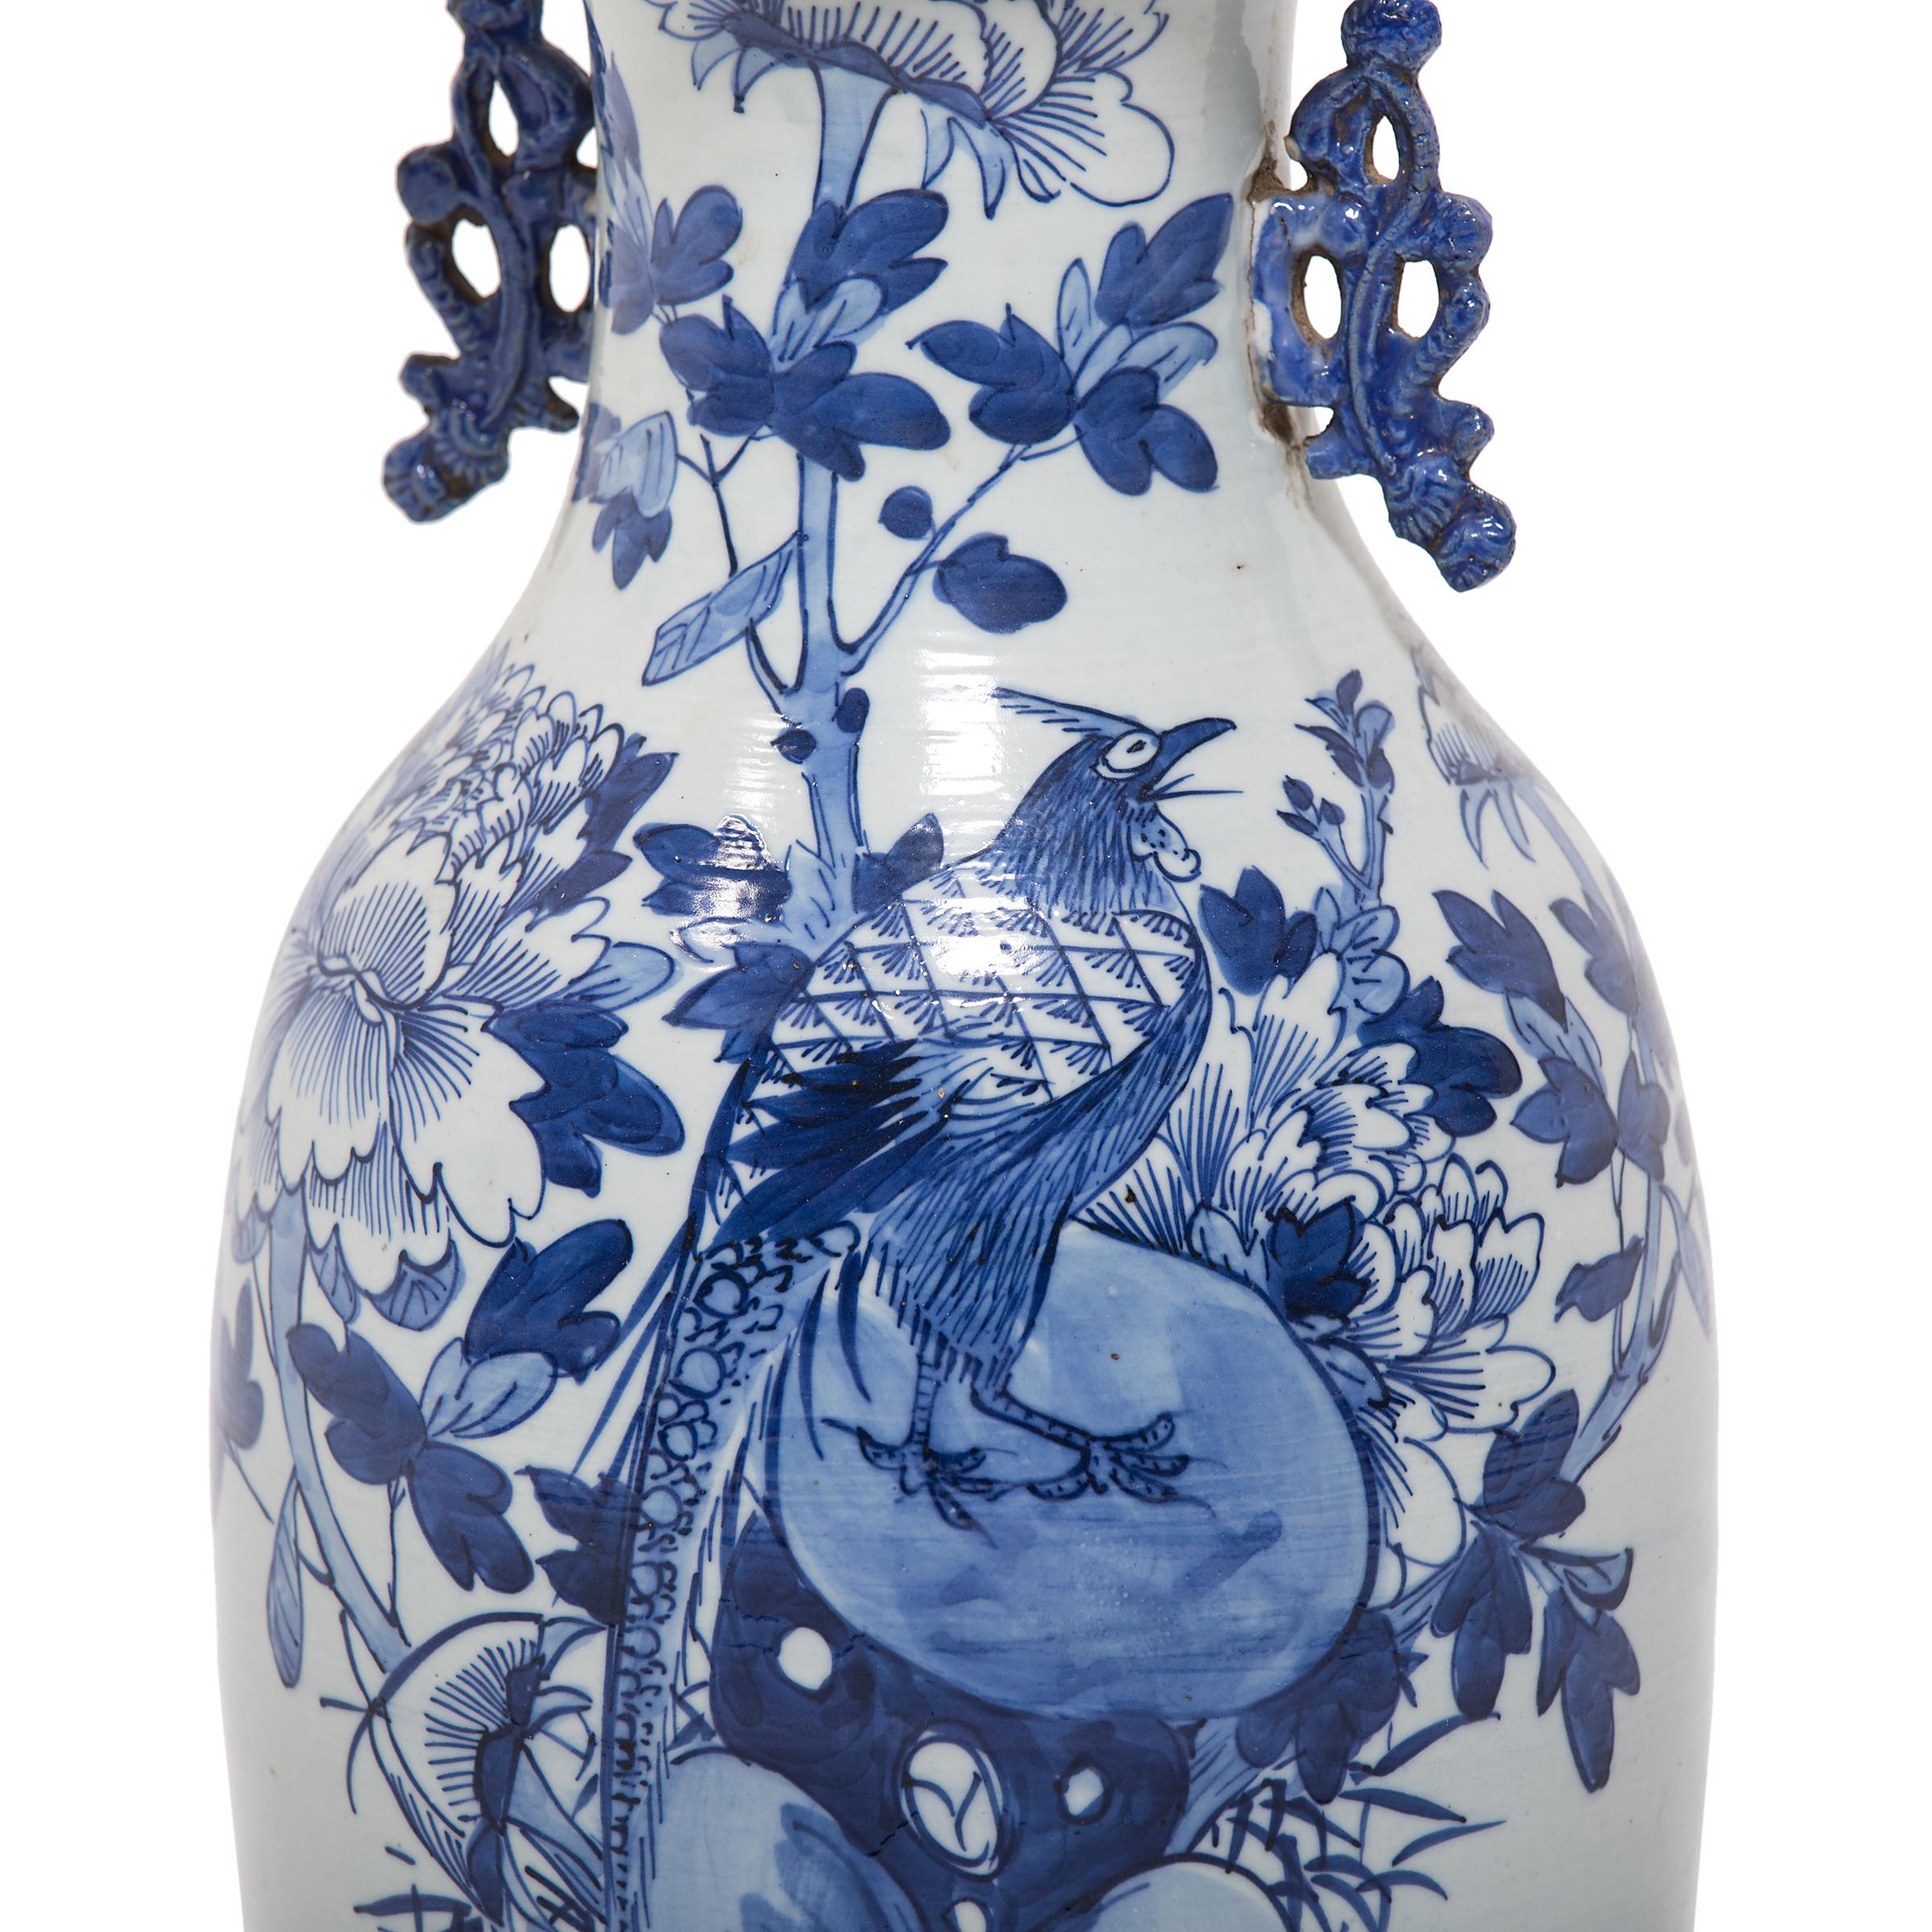 19th Century Chinese Blue and White Peony Fantail Vase, c. 1850